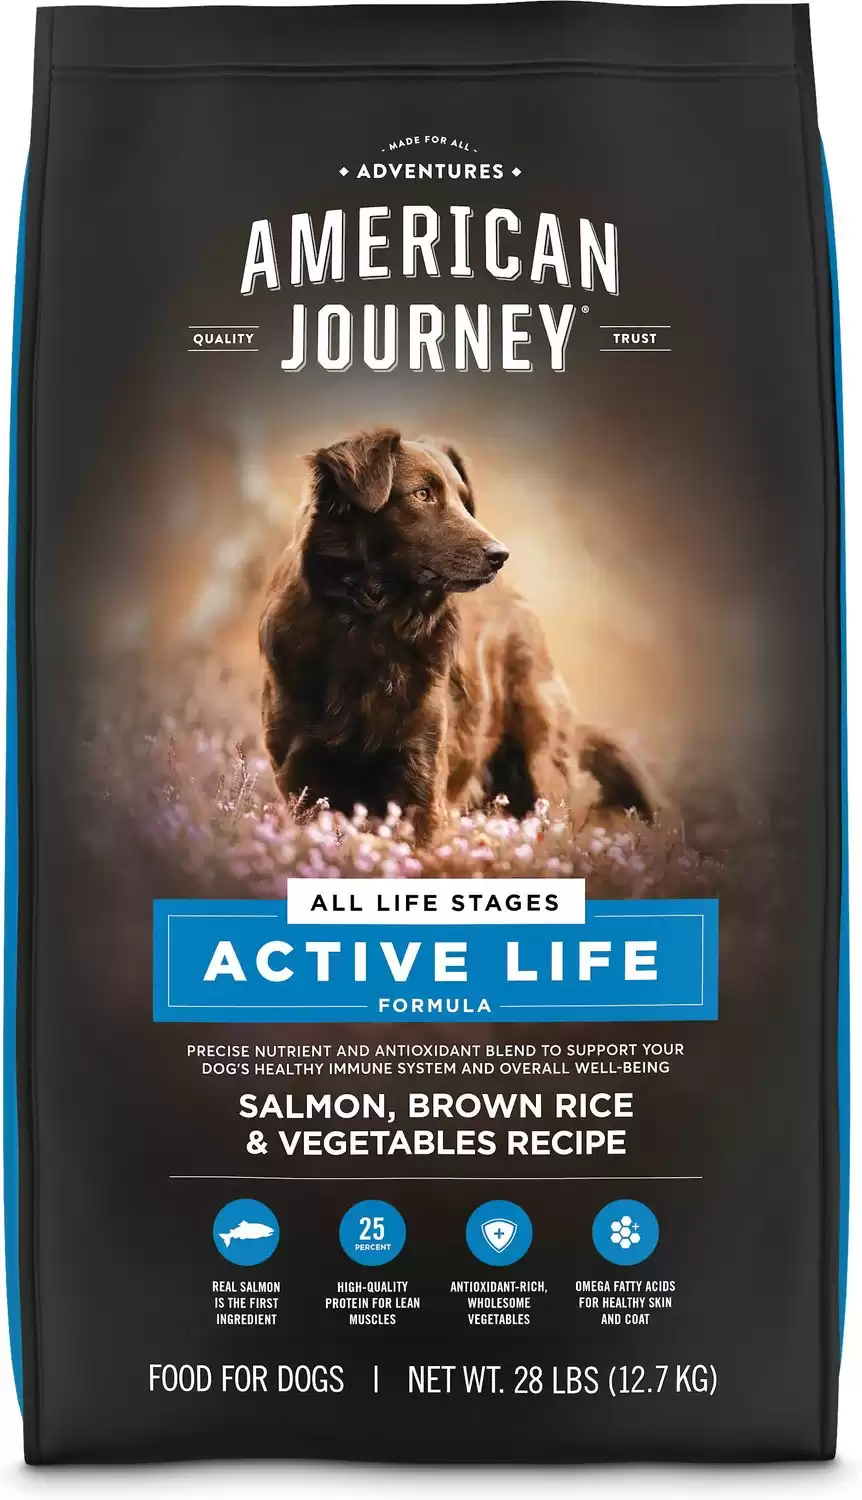 American Journey Active Life Formula Salmon, Brown Rice & Vegetables